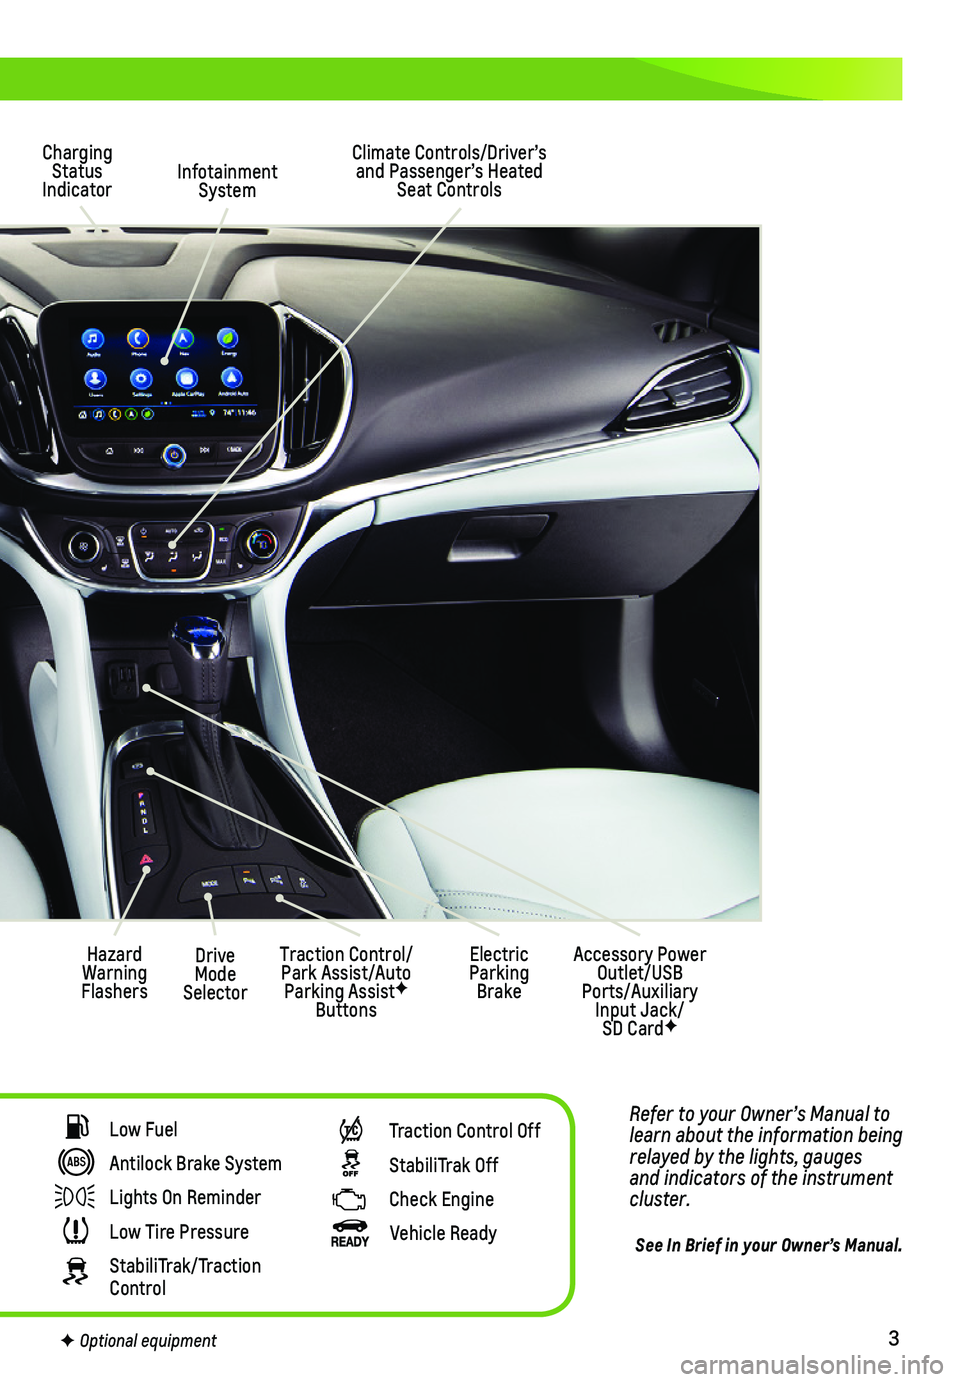 CHEVROLET VOLT 2019  Get To Know Guide 3
Refer to your Owner’s Manual to learn about the information being relayed by the lights, gauges and indicators of the instrument cluster.
See In Brief in your Owner’s Manual.
Infotainment System